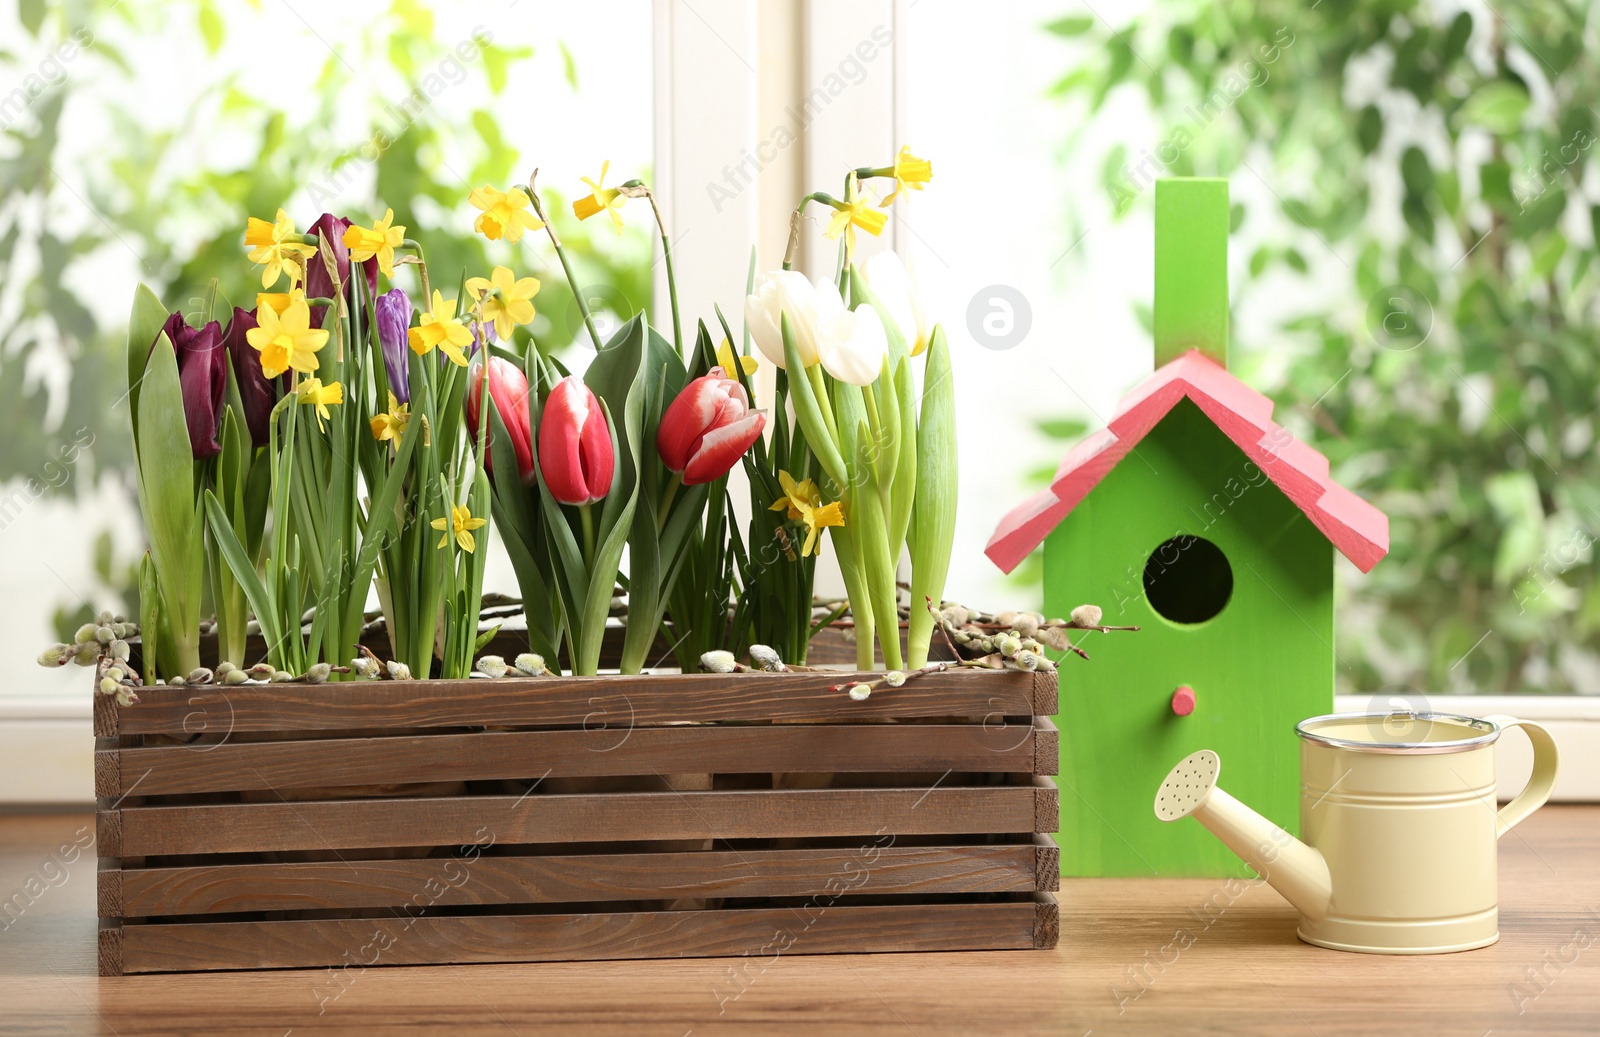 Photo of Beautiful spring flowers in wooden crate with watering can and birdhouse on window sill